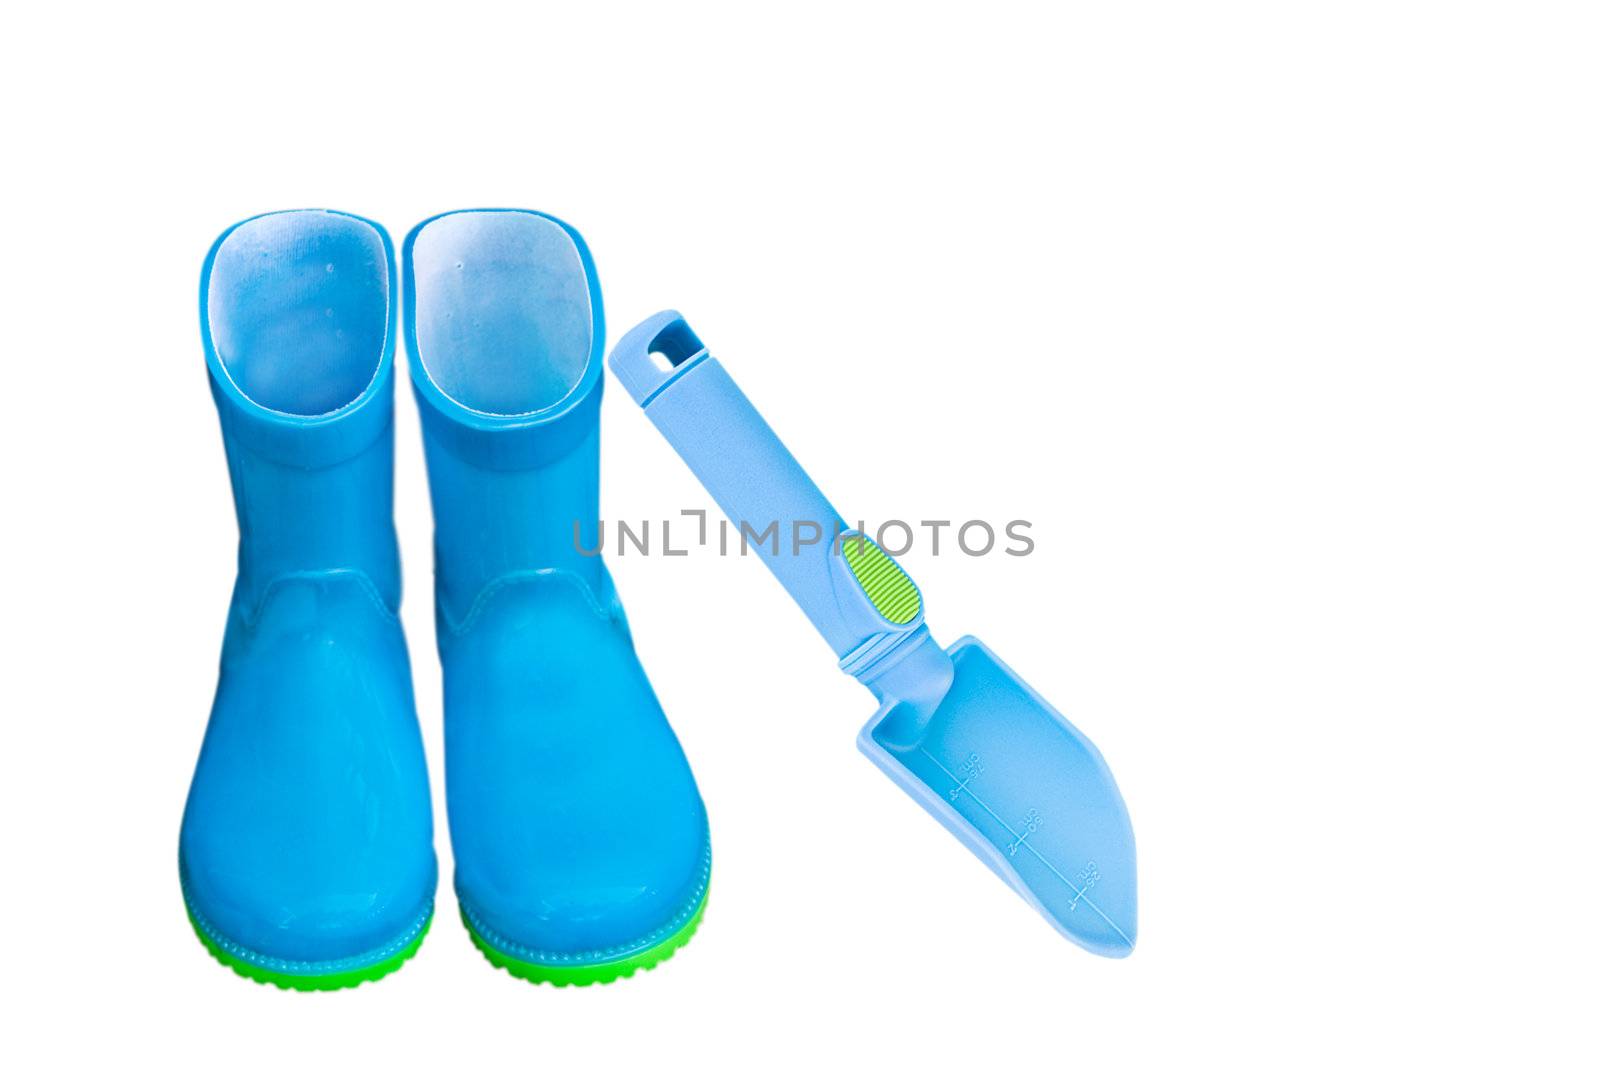 Child's rubber rain boots and garden trowel isolated on white.